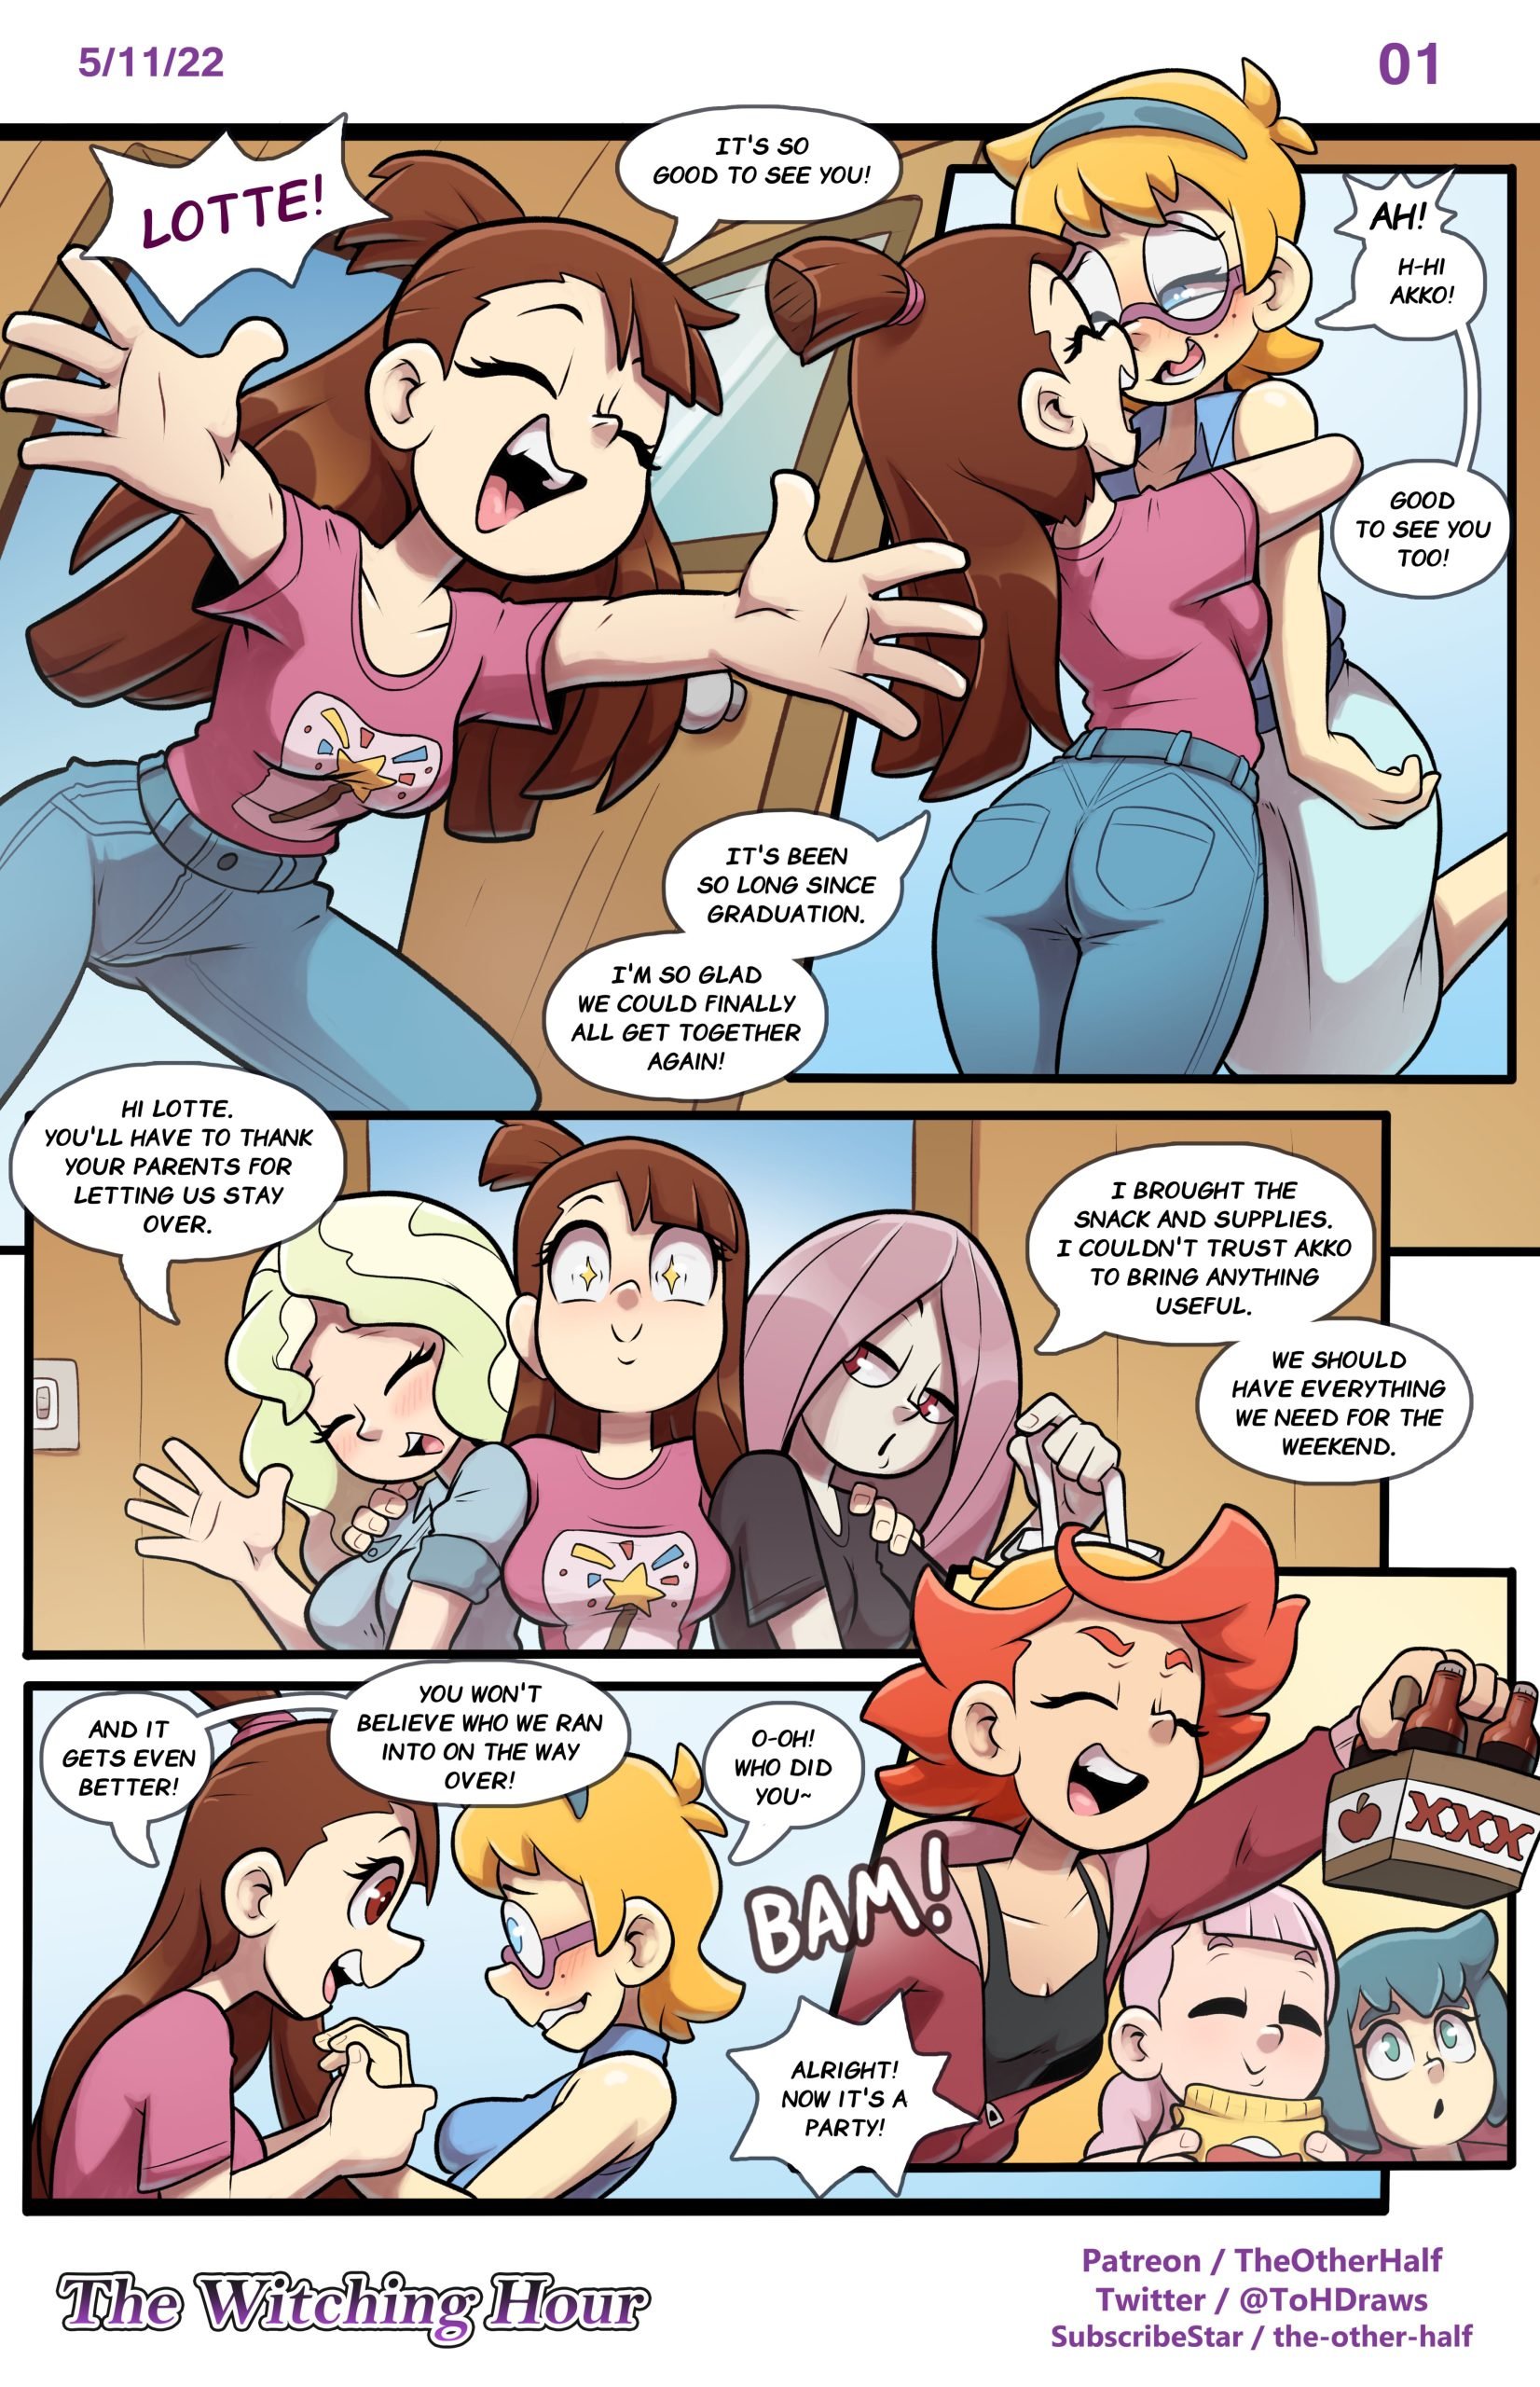 The Witching Hour (Little Witch Academia) TheOtherHalf Porn Comic photo